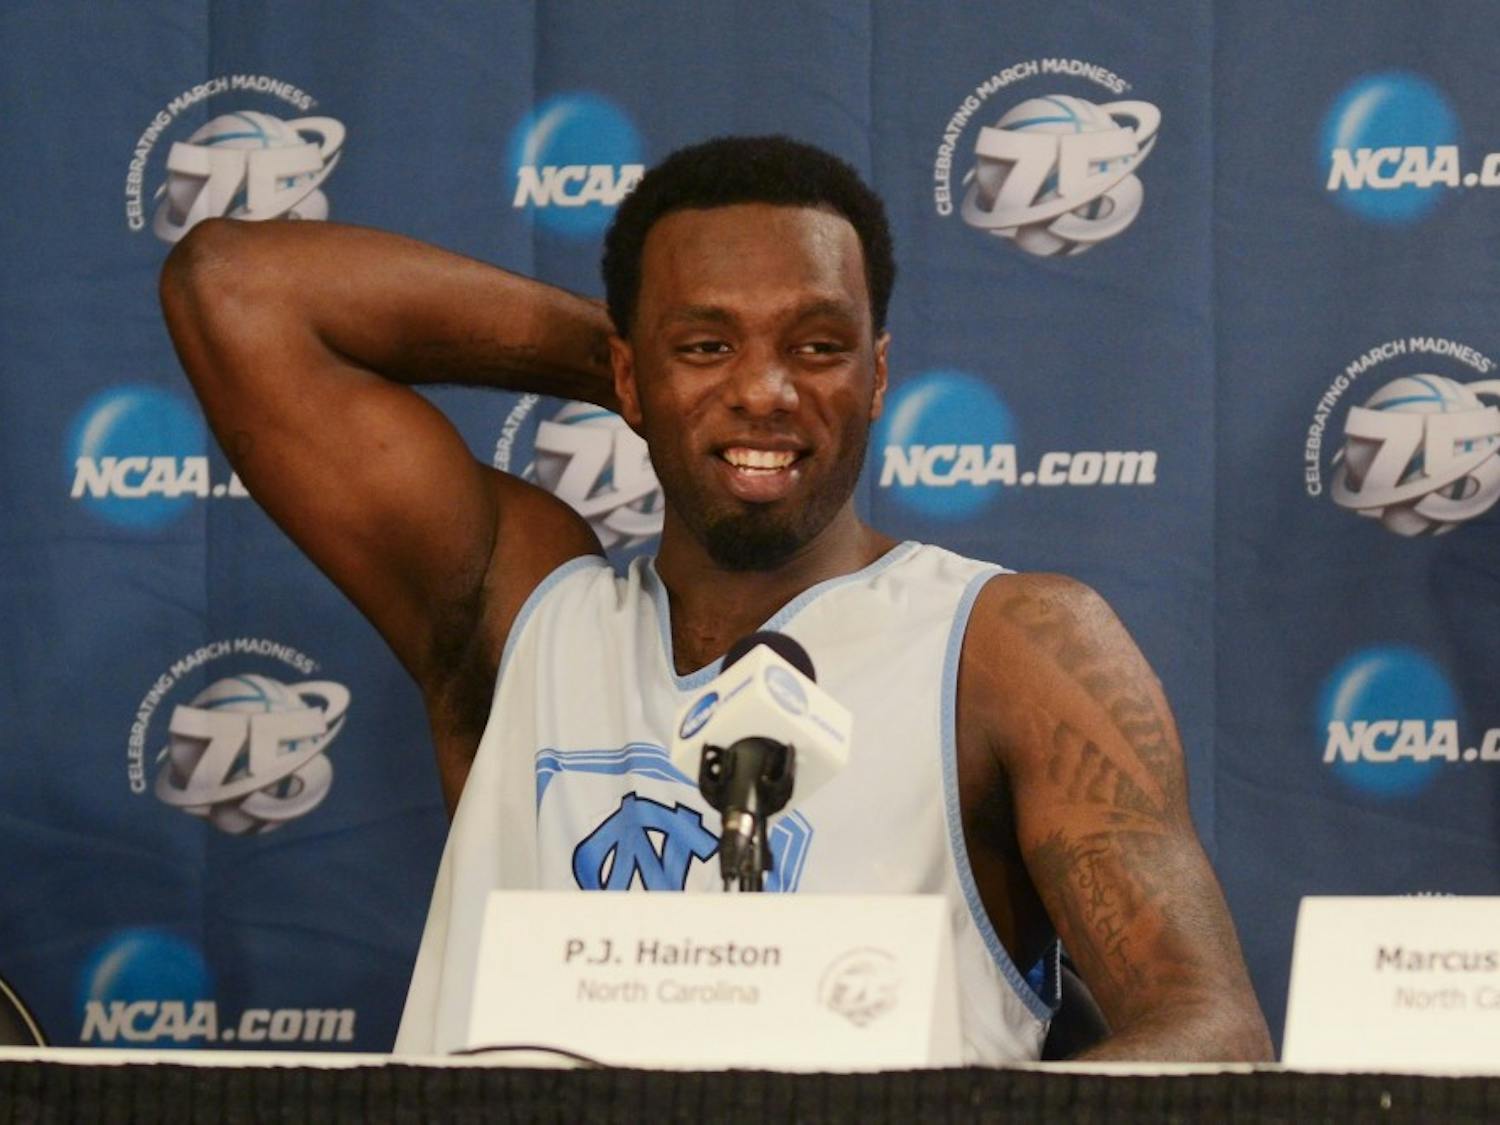 P.J. Hairston speaks to members of the media on March 23rd, 2013 in the Sprint Center in Kansas City, Missouri.